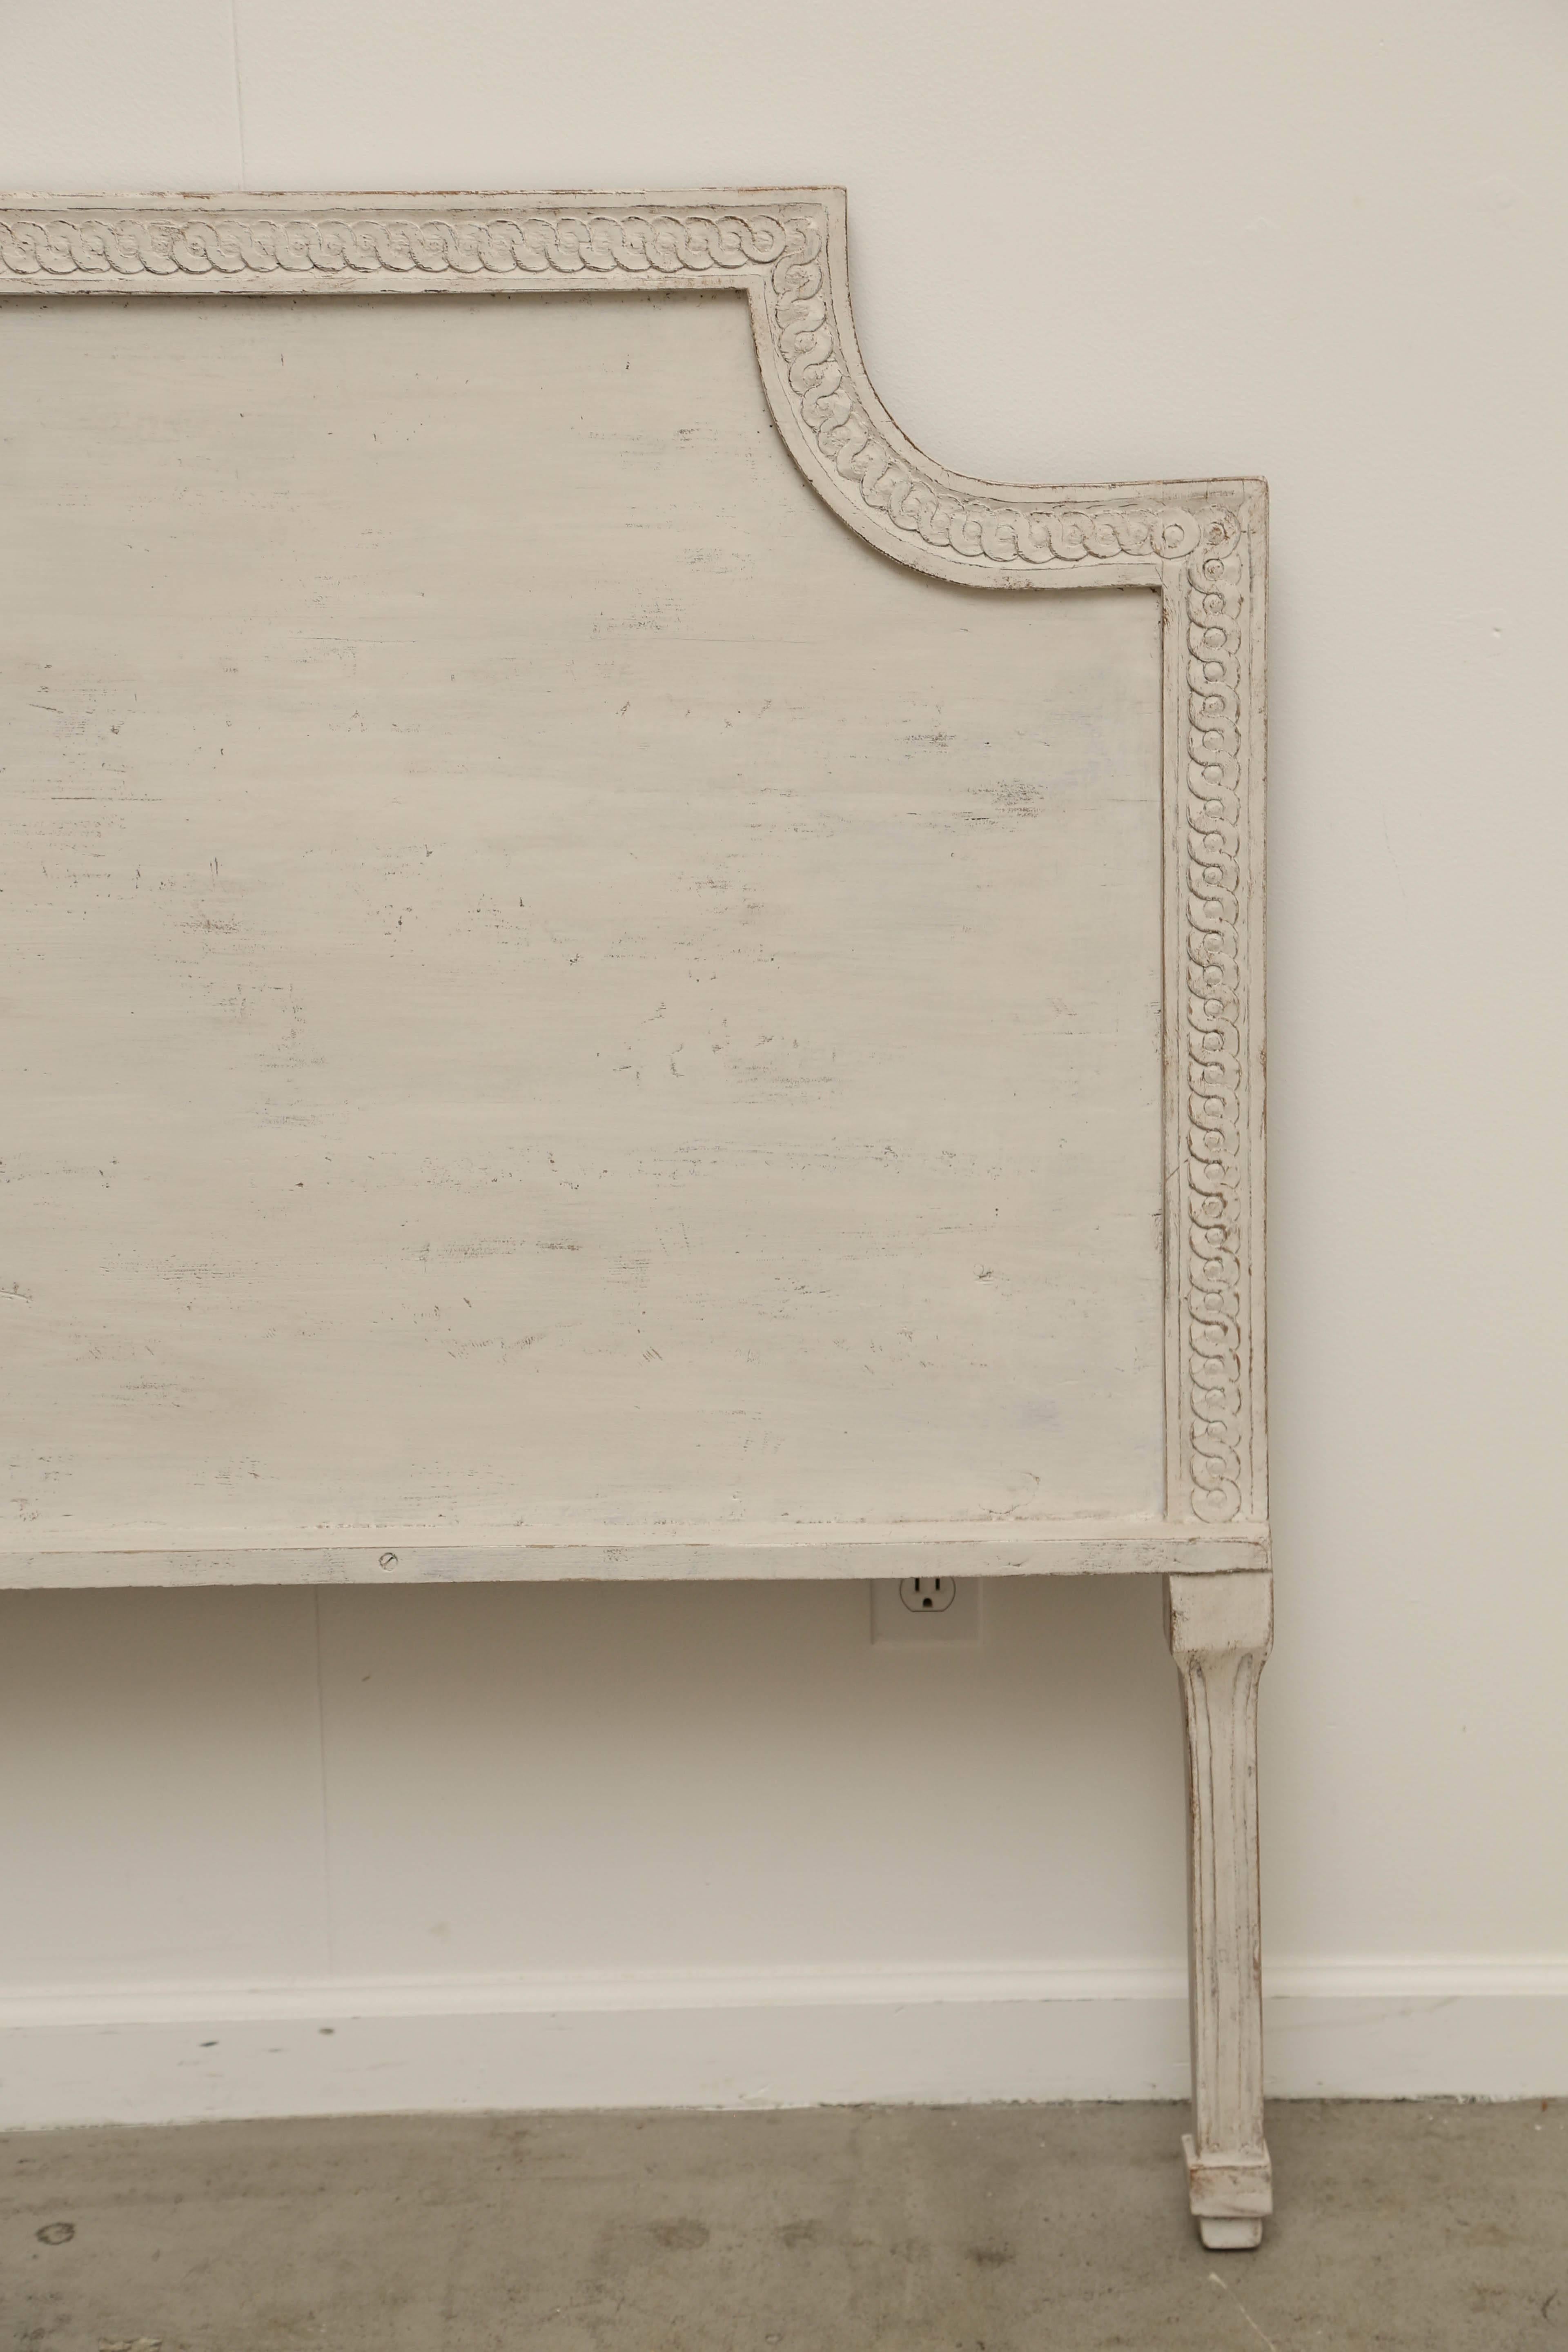 Antique Swedish Gustavian style painted headboard, 19th century
Classic rectangular shape with curved ends with interlocking circle border set into a frame border. Tapered fluted legs added to raise the height and decorative
Refreshed painted